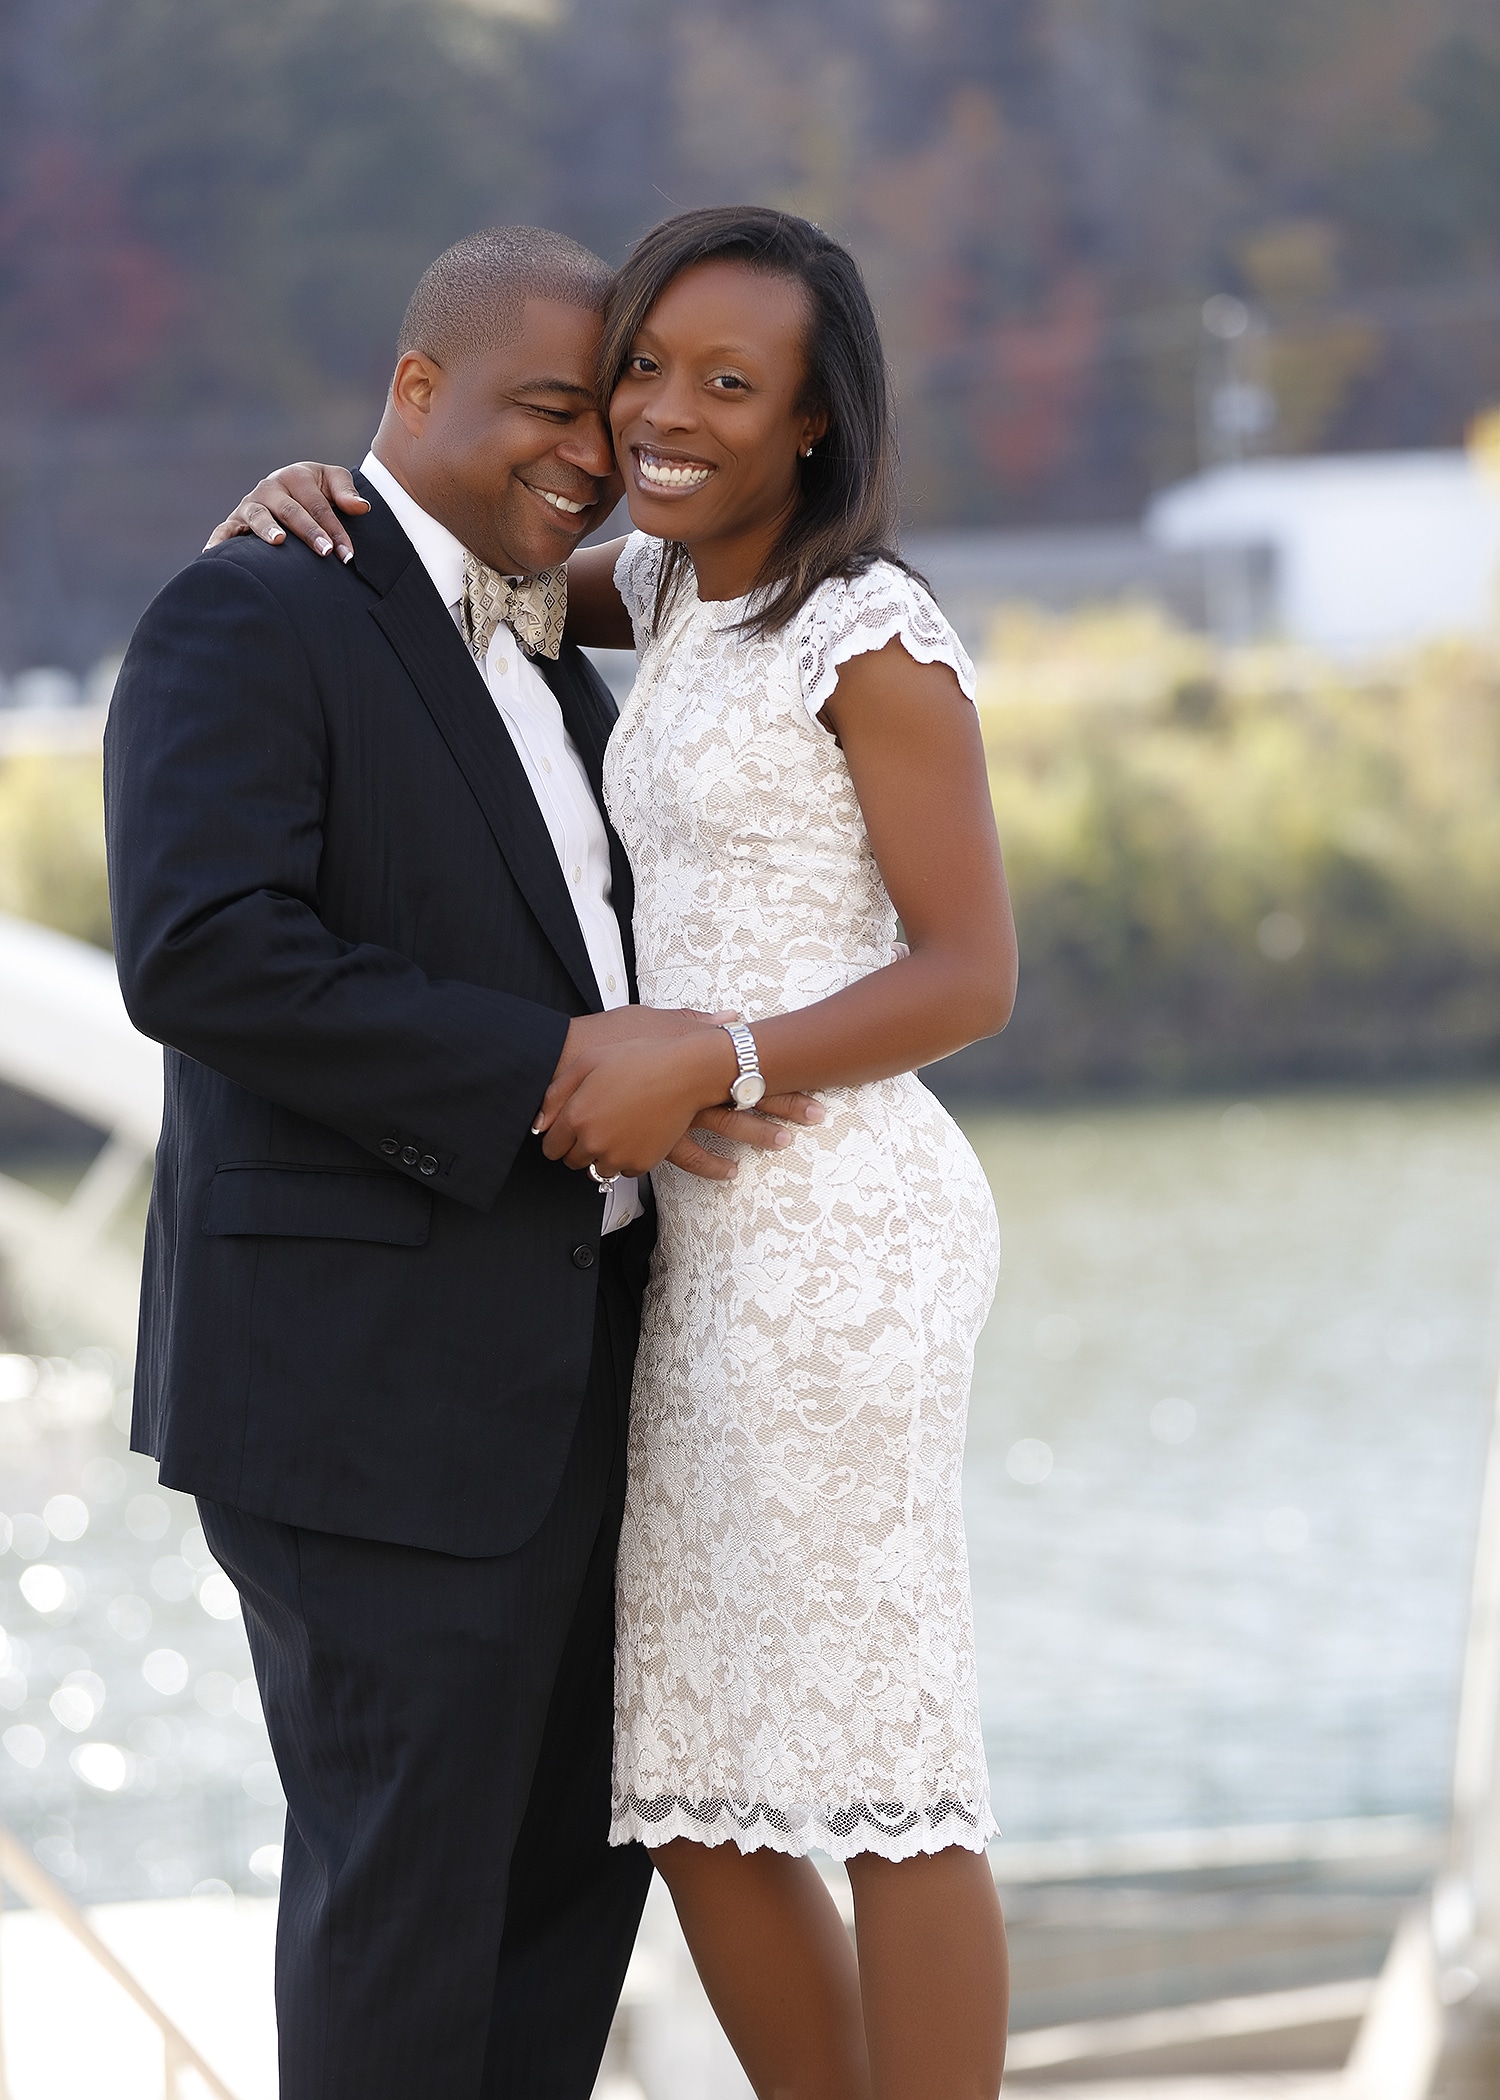 West Virginia State Capitol Wedding Photographer | Jamilah and Terrence Pre-Wedding Photo Session